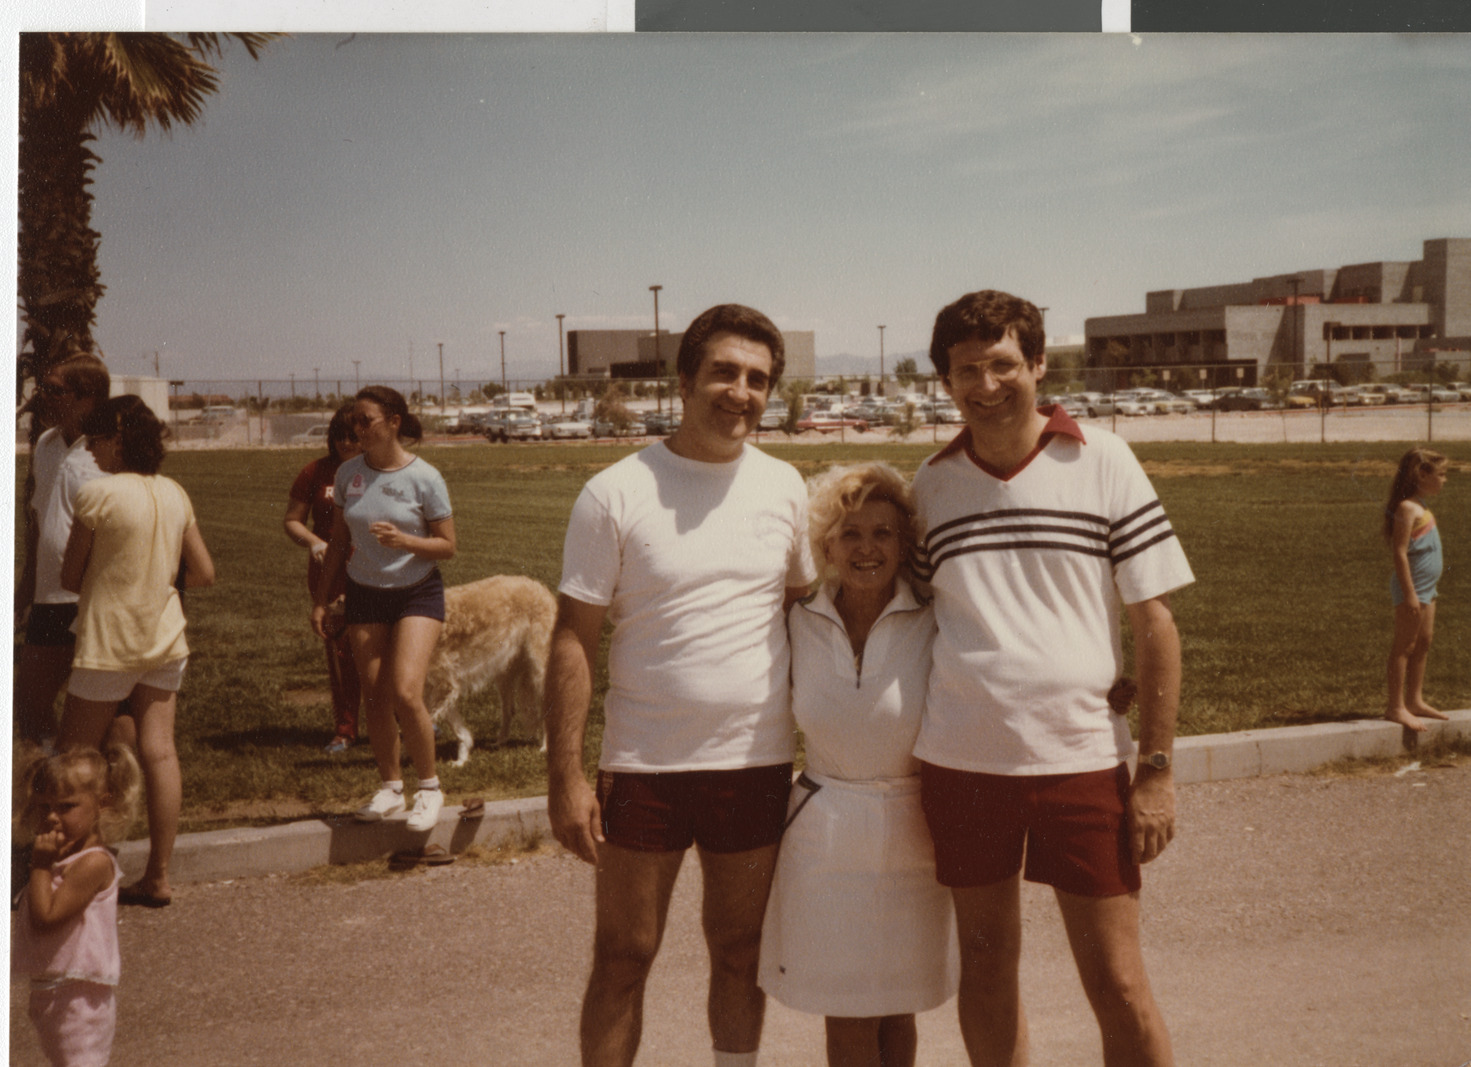 Photograph of Ron Lurie and unknown people